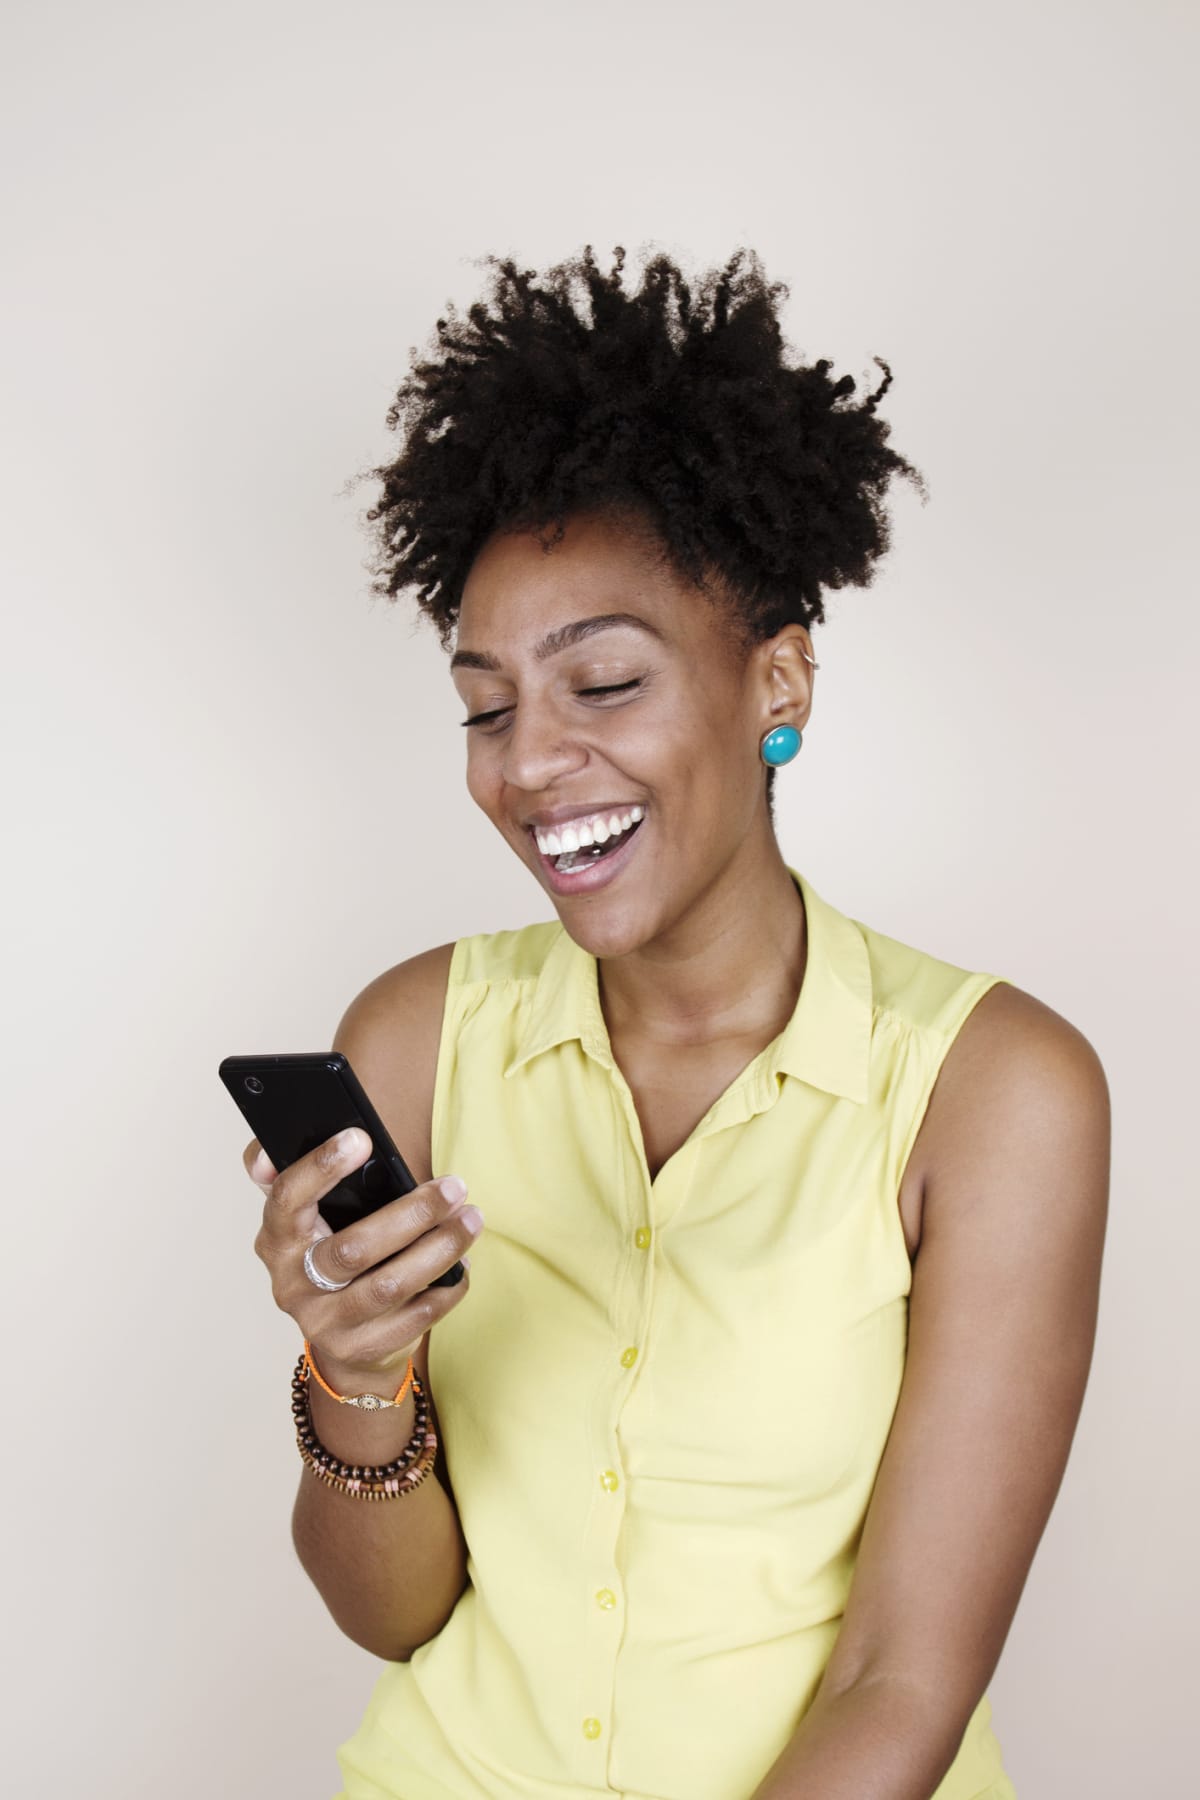 Woman smiling widely while looking at her smartphone